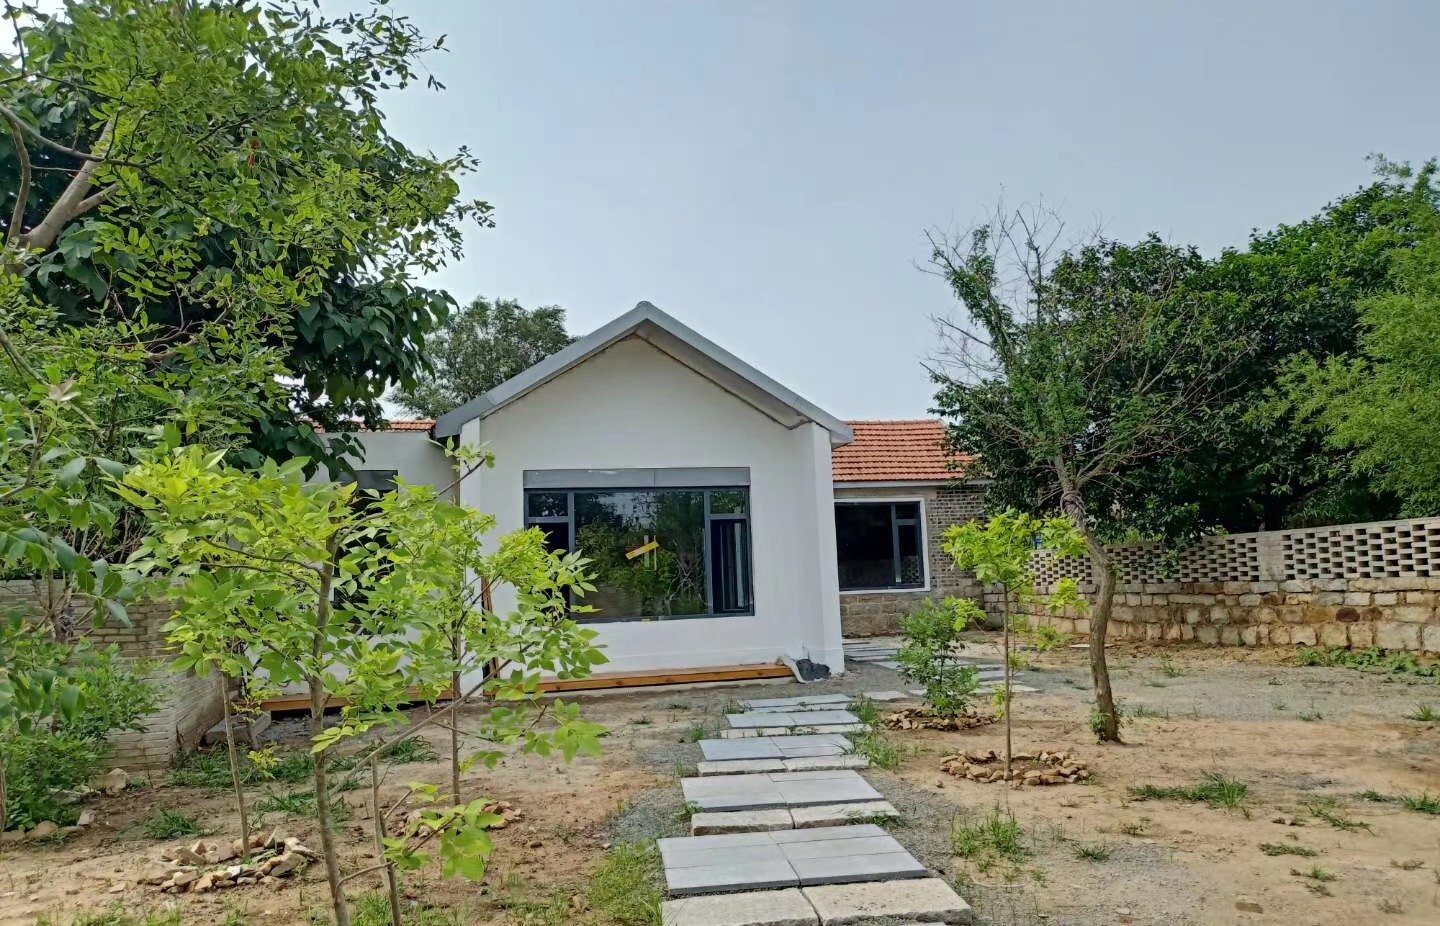 Zhao Hui’s renovated farmhouse in a village in Dashuibo, Shandong, eastern China is part of an experiment to revitalise its rural economy, a key national policy goal. Photo: courtesy of Zhao Hui